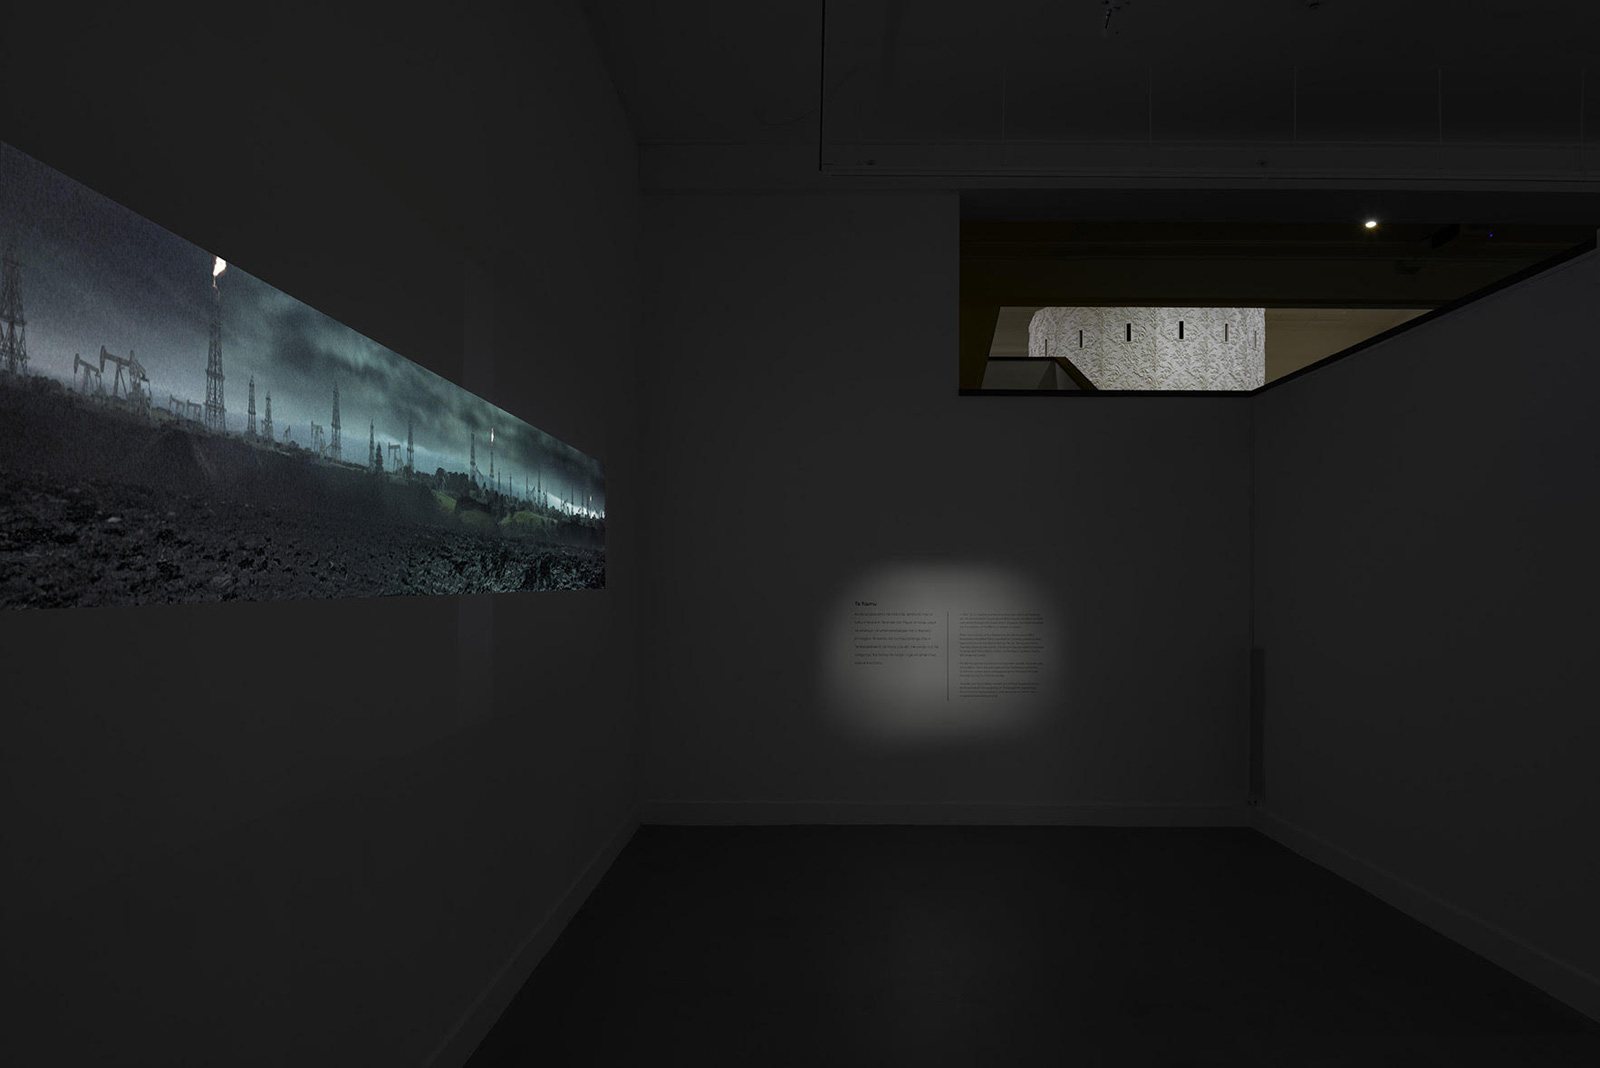 Video projection by New Zealand artist Brett Graham and Animation Research Ltd., at the Tai Moana Tai Tangata exhibition